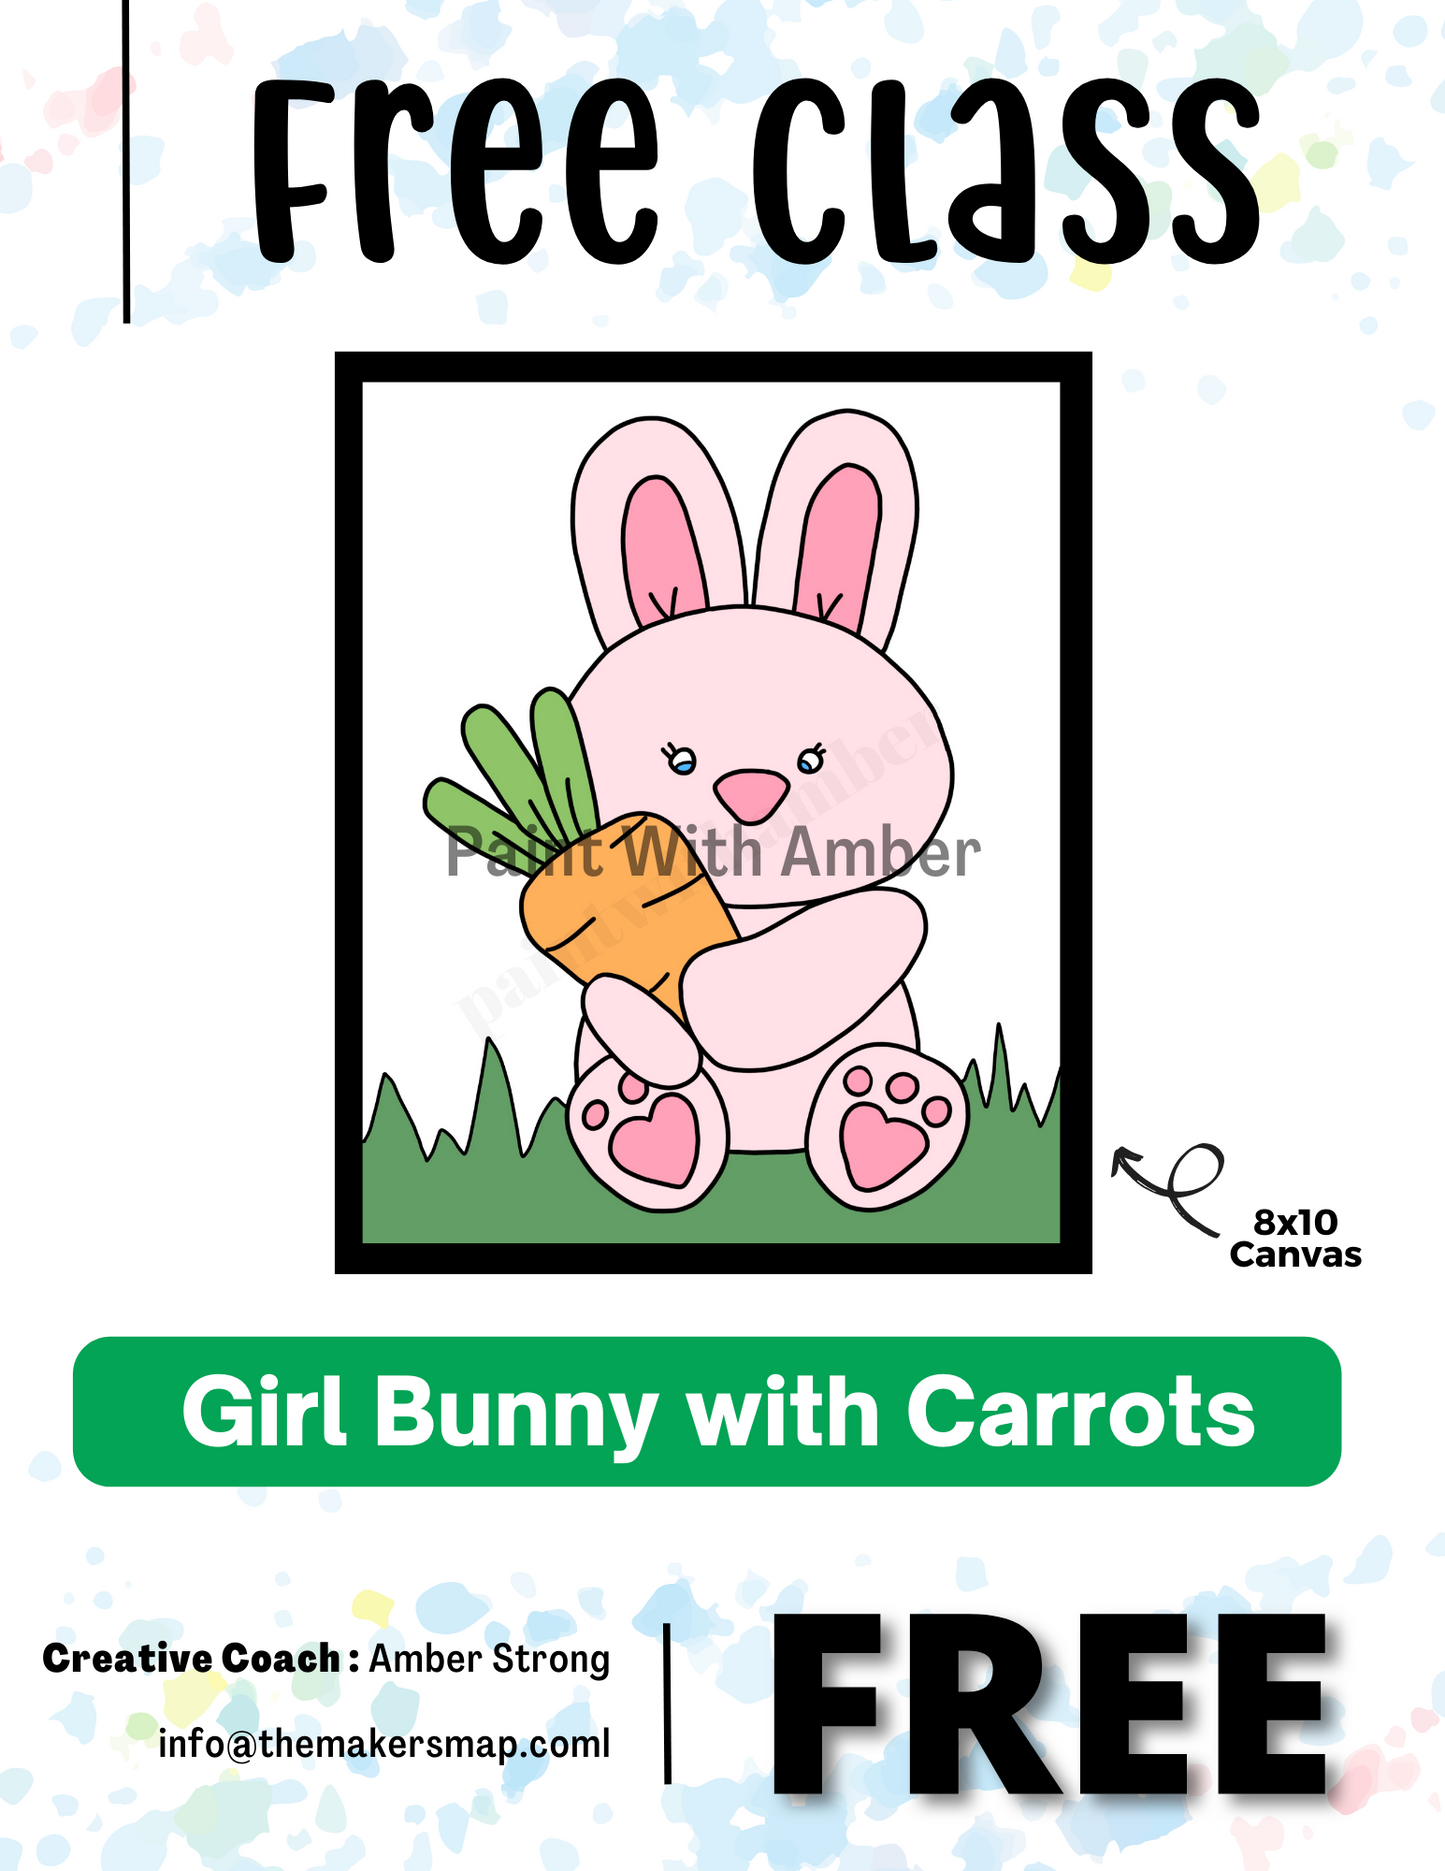 Free Girl Bunny With Carrots Paint Class Workshop